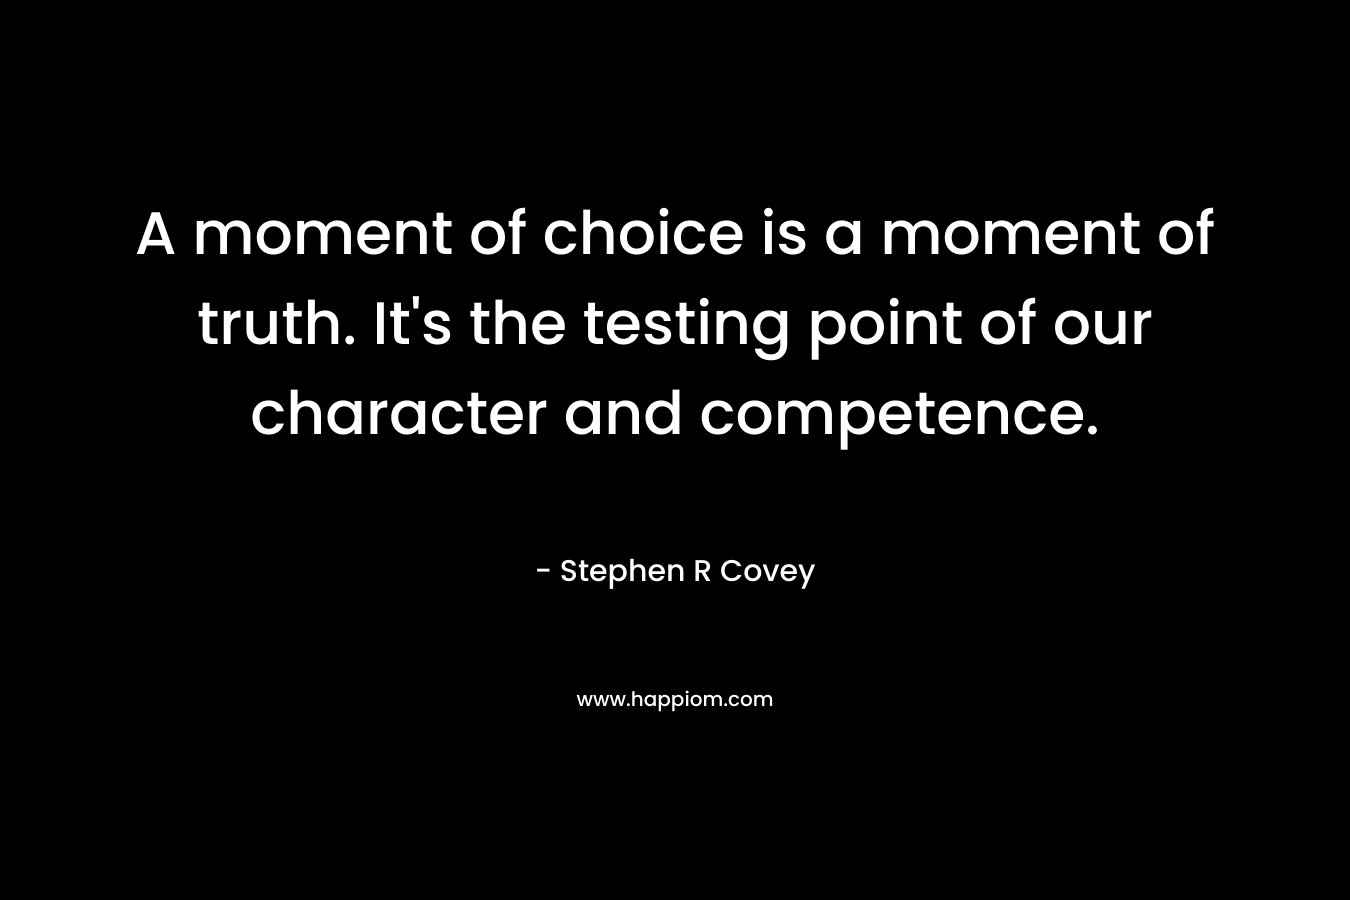 A moment of choice is a moment of truth. It’s the testing point of our character and competence. – Stephen R Covey